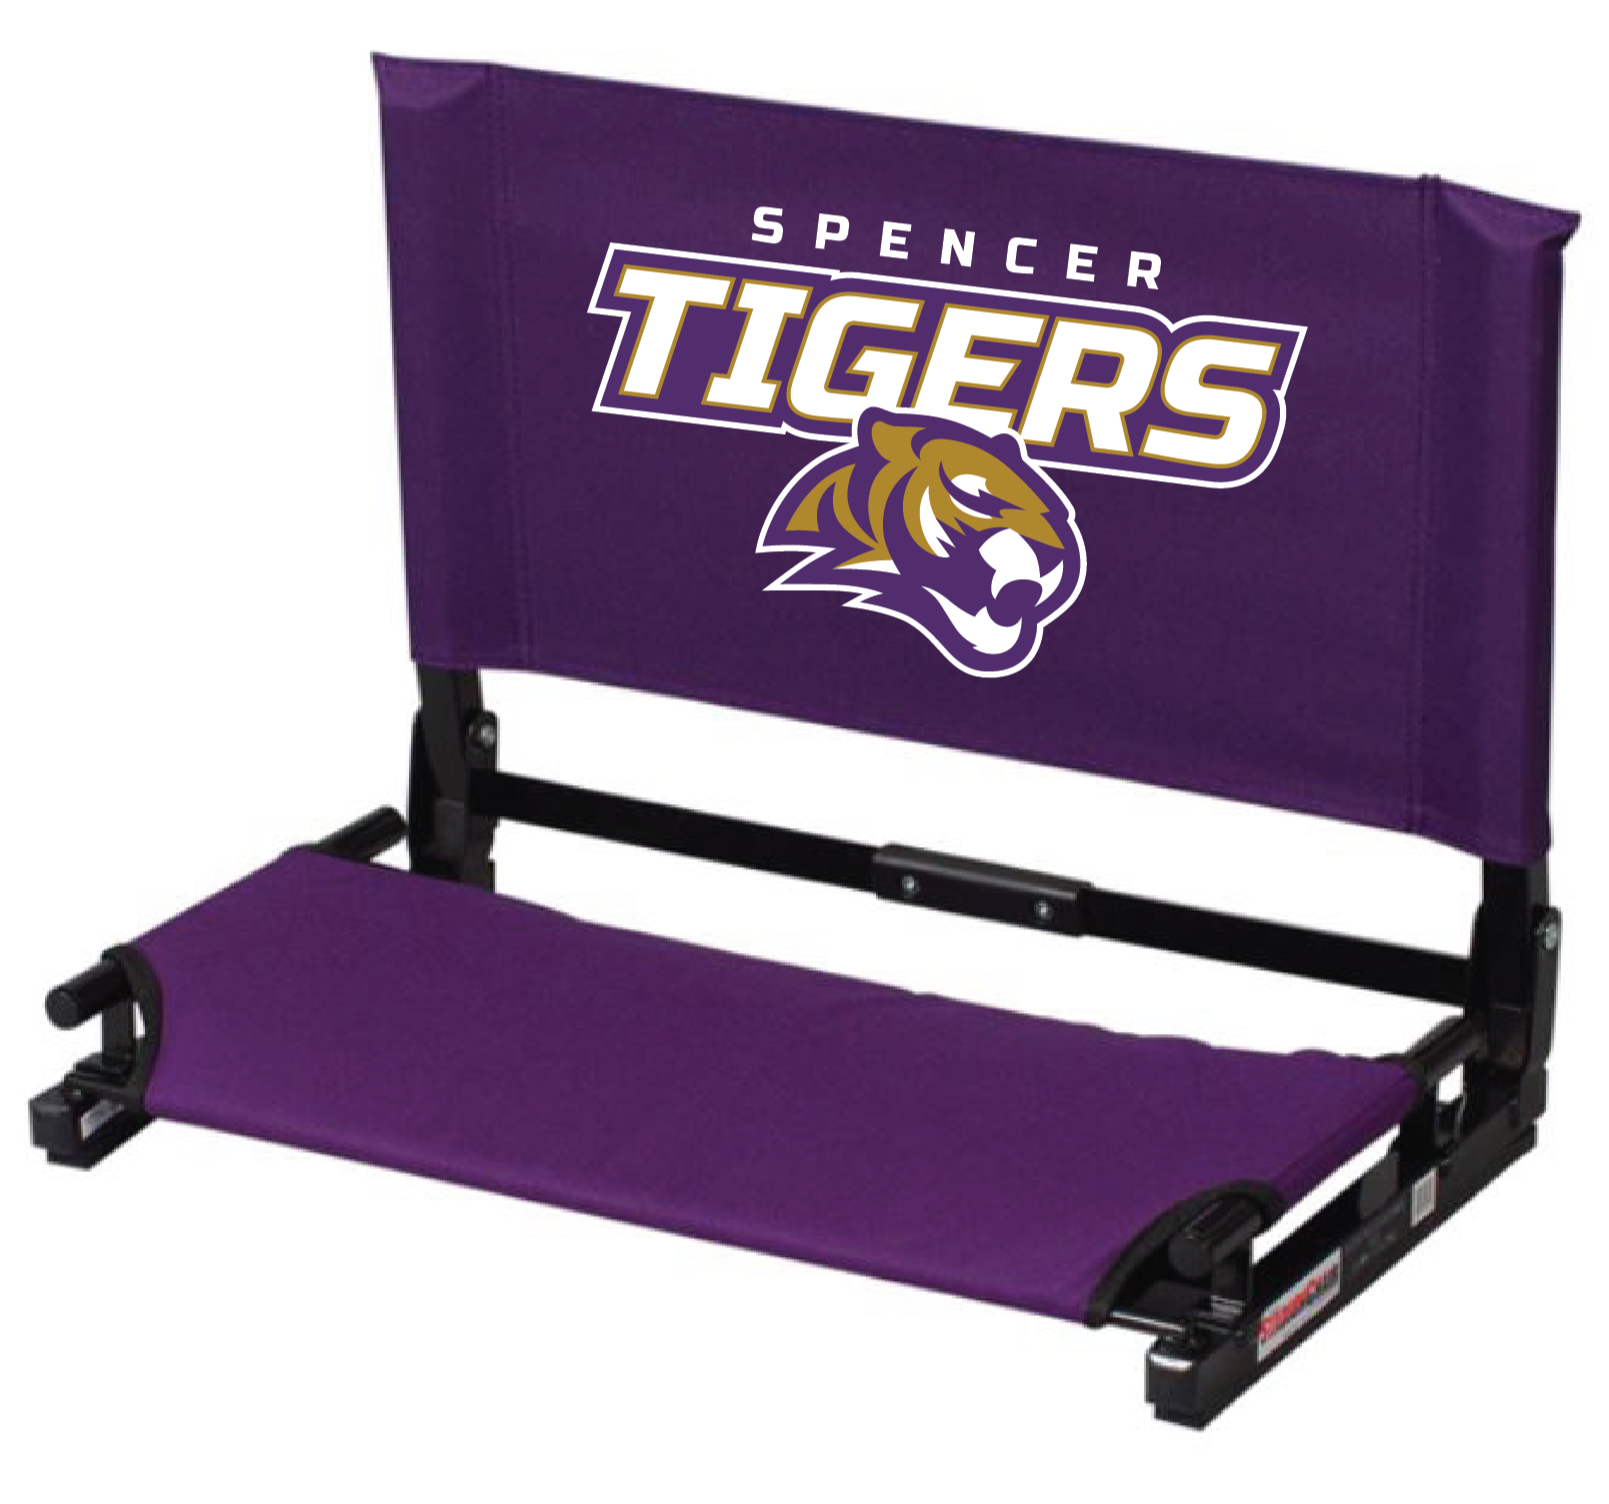 Spencer Tigers Stadium Chair (Wide)